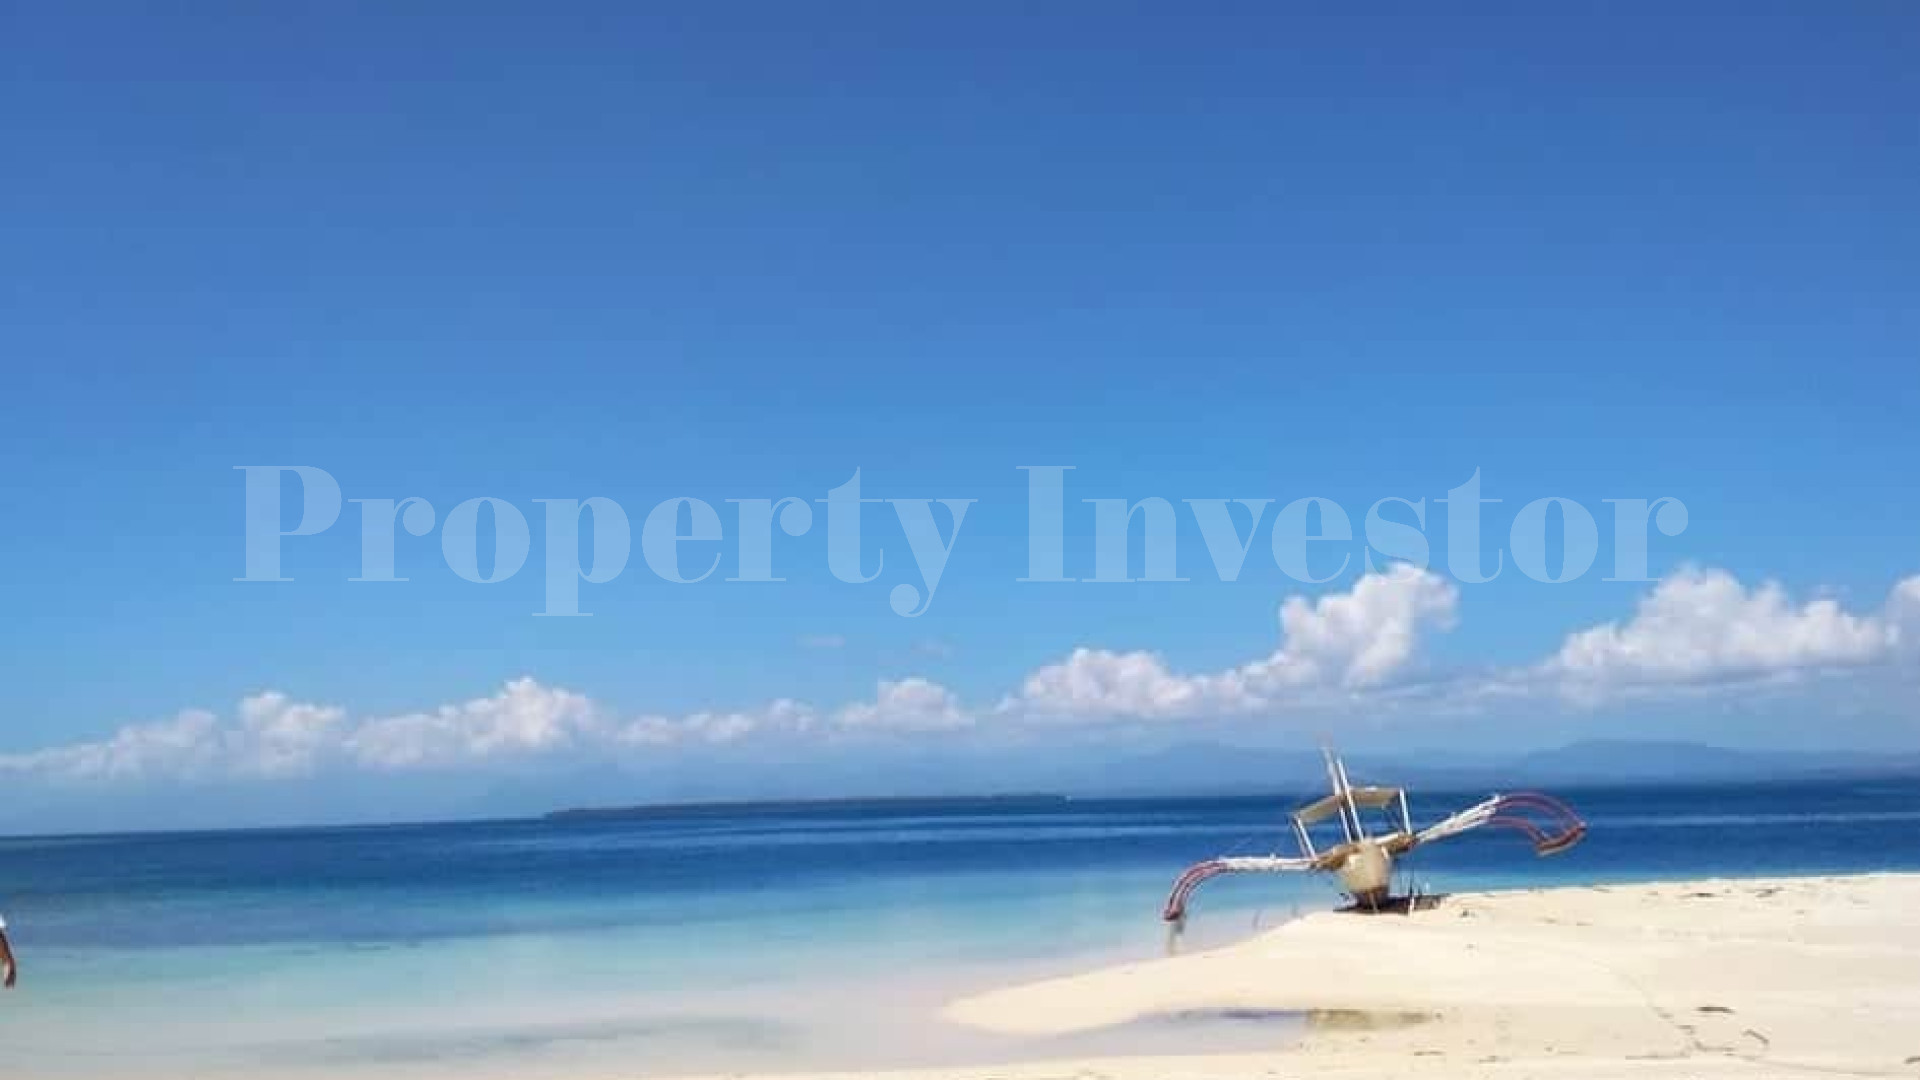 Picture Perfect 5.7 Hectare Private Island for Sale in Palawan, Philippines